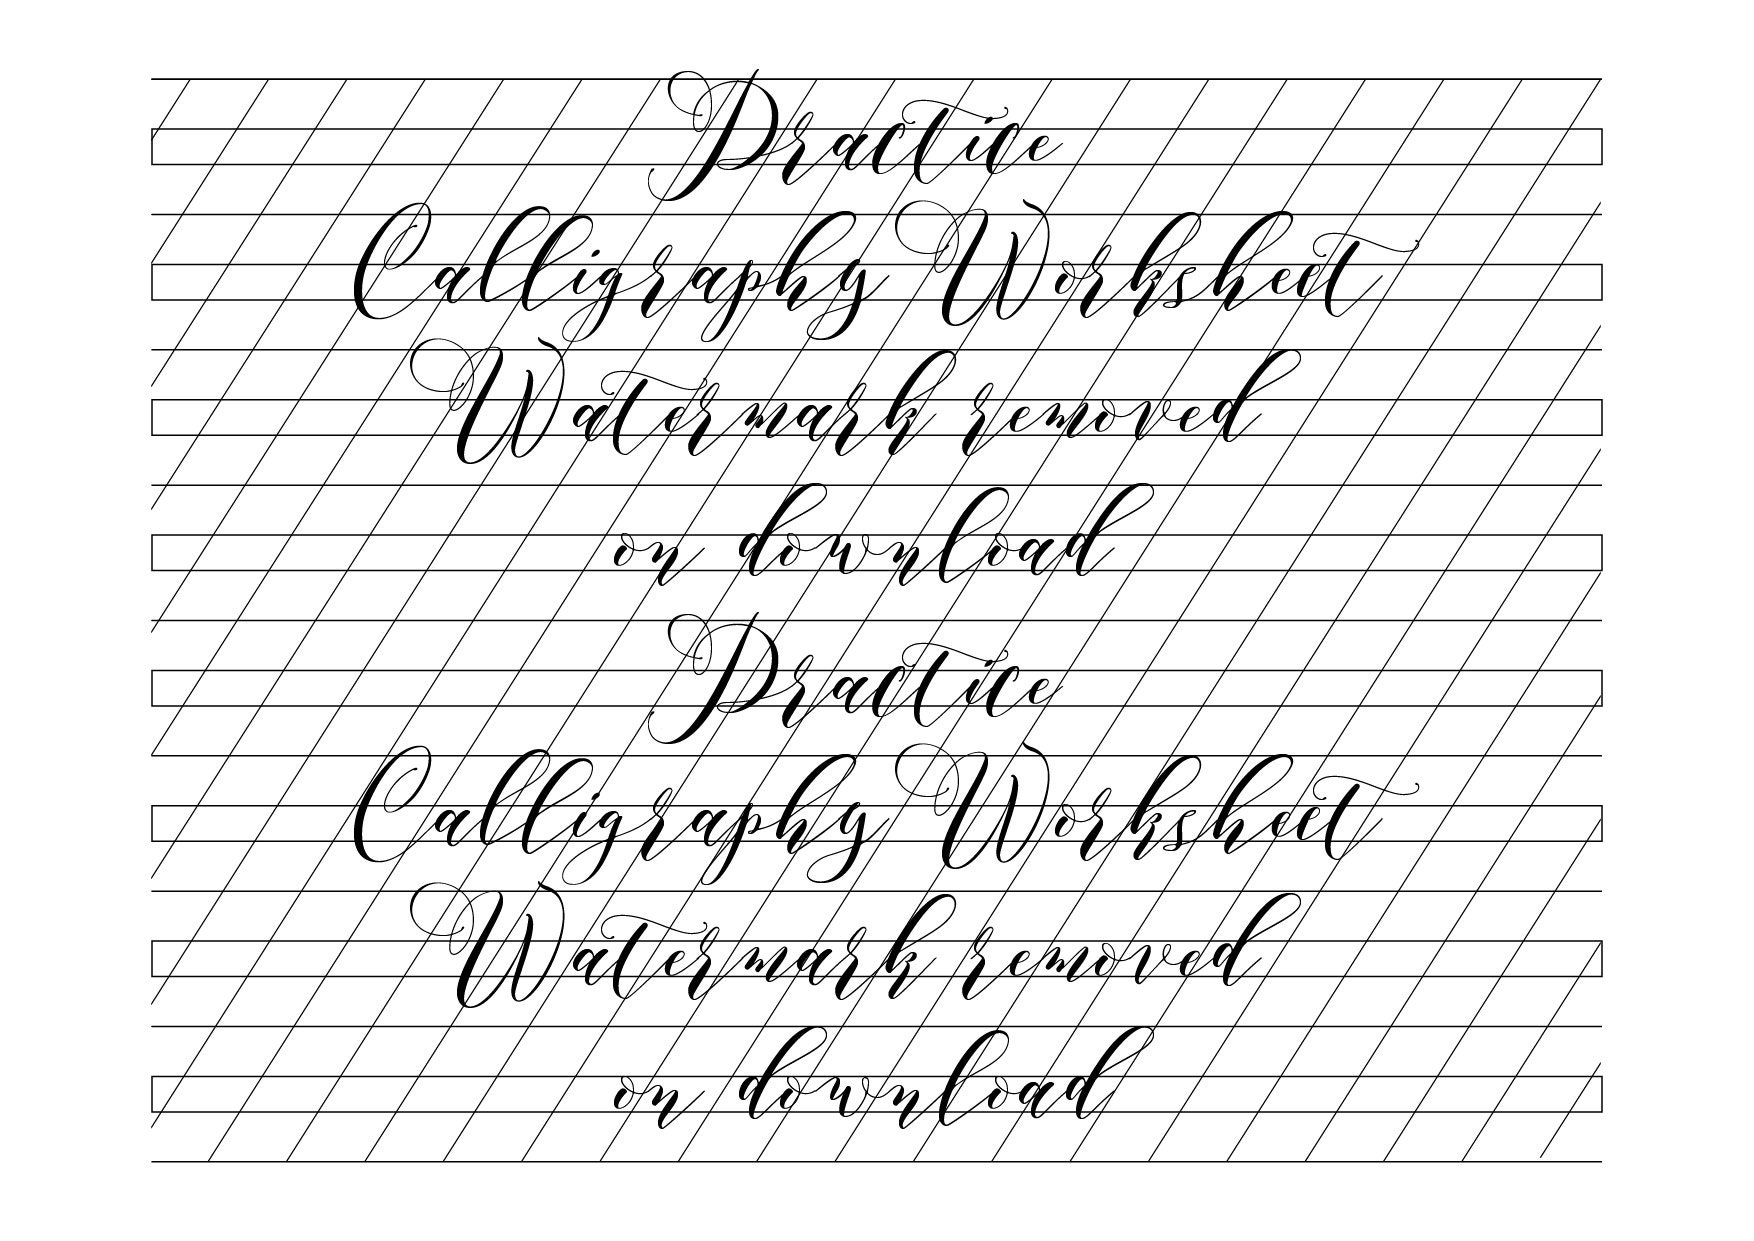 Calligraphy practice template download. Italic calligraphy guide. Printable  script handwriting guide. Lined calligraphy practice paper.